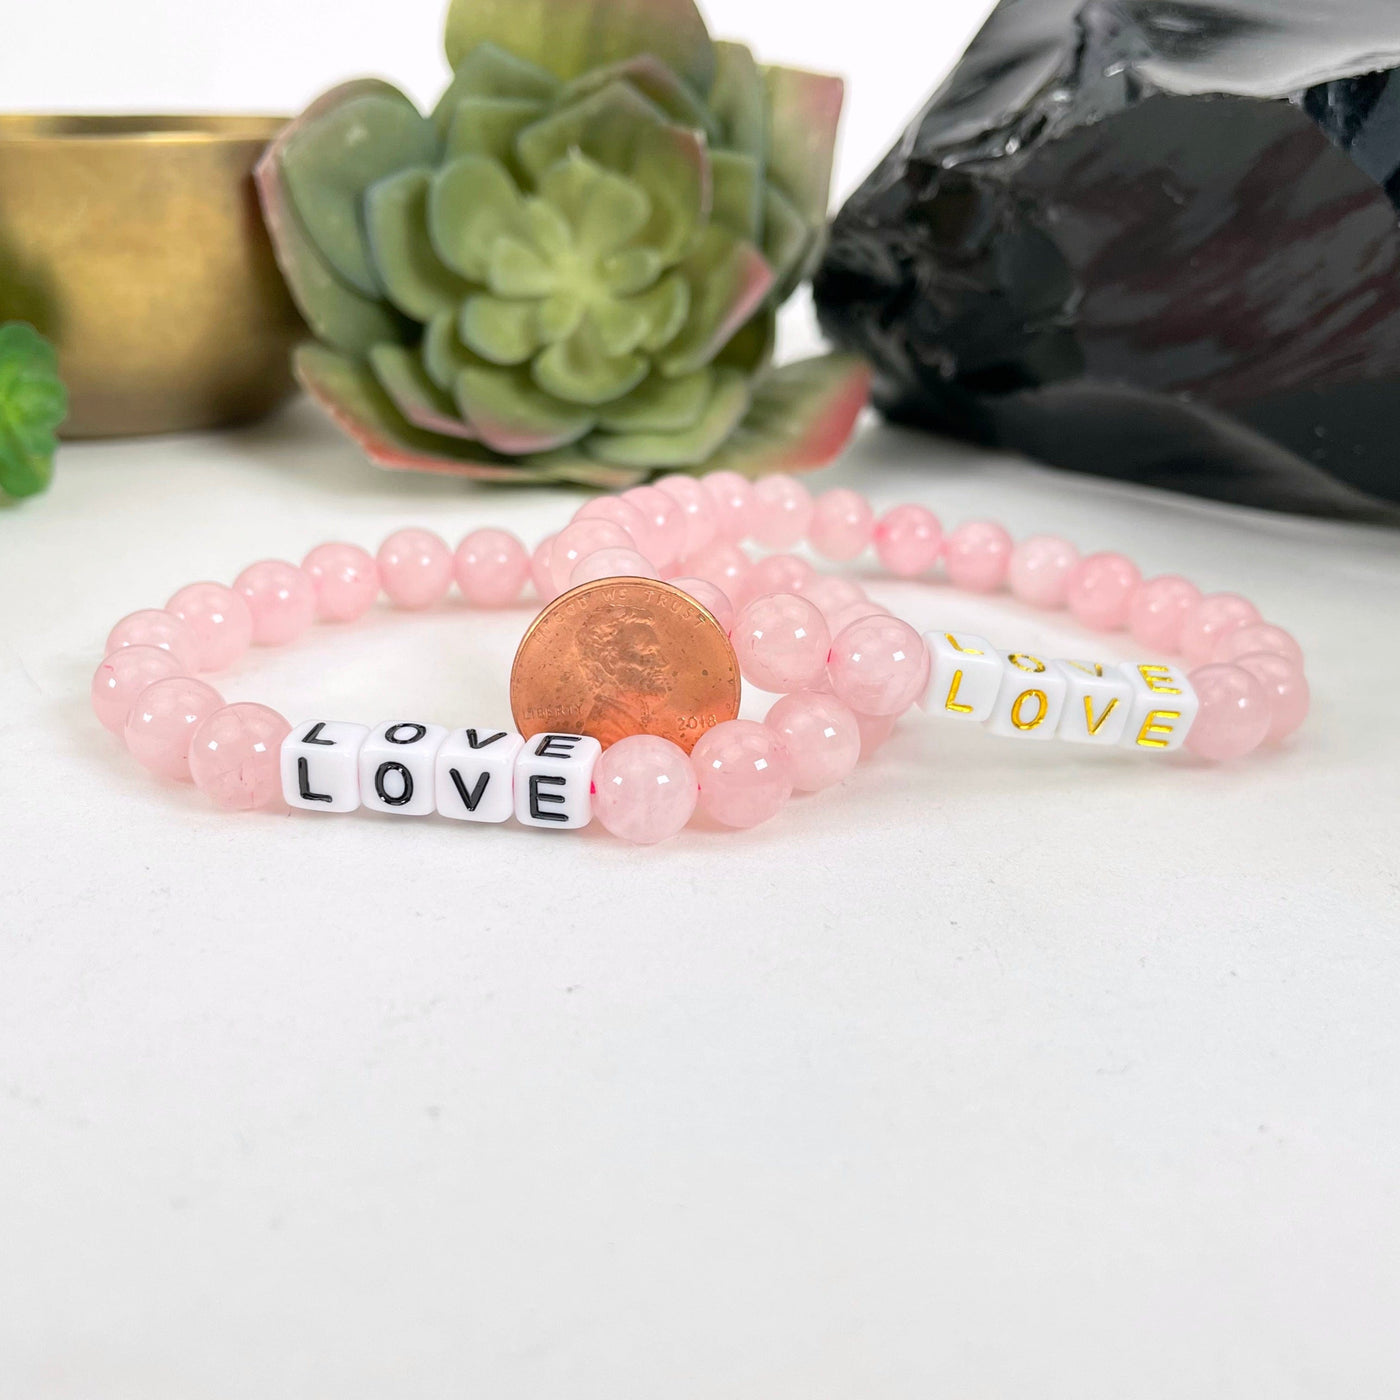 rose quartz beaded bracelets with penny for size reference